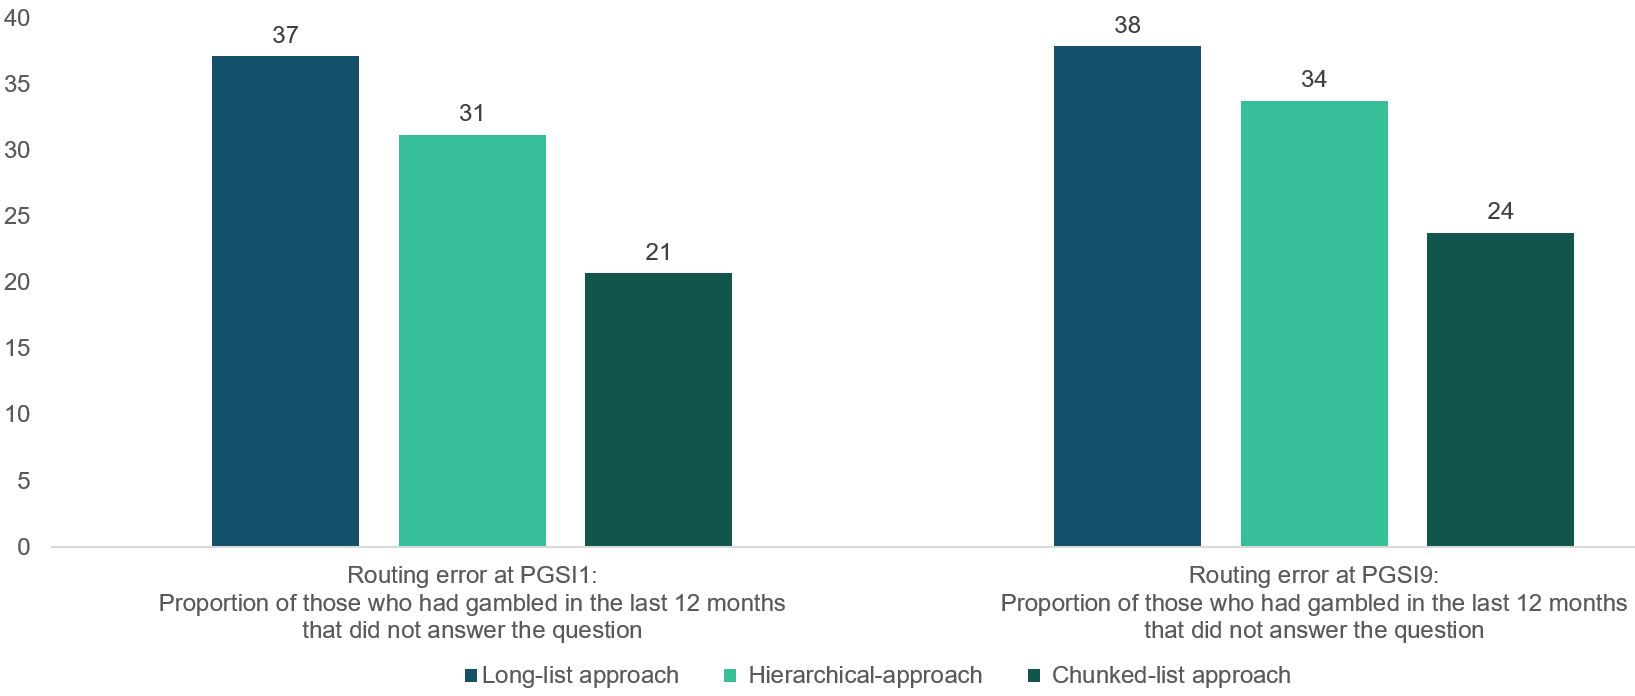 A bar chart of the postal questionnaire Problem Gambling Severity Index (PGSI) non-response amongst those who had gambled in the last 12 months, by questions approach. Data from the chart is provided within the following table.